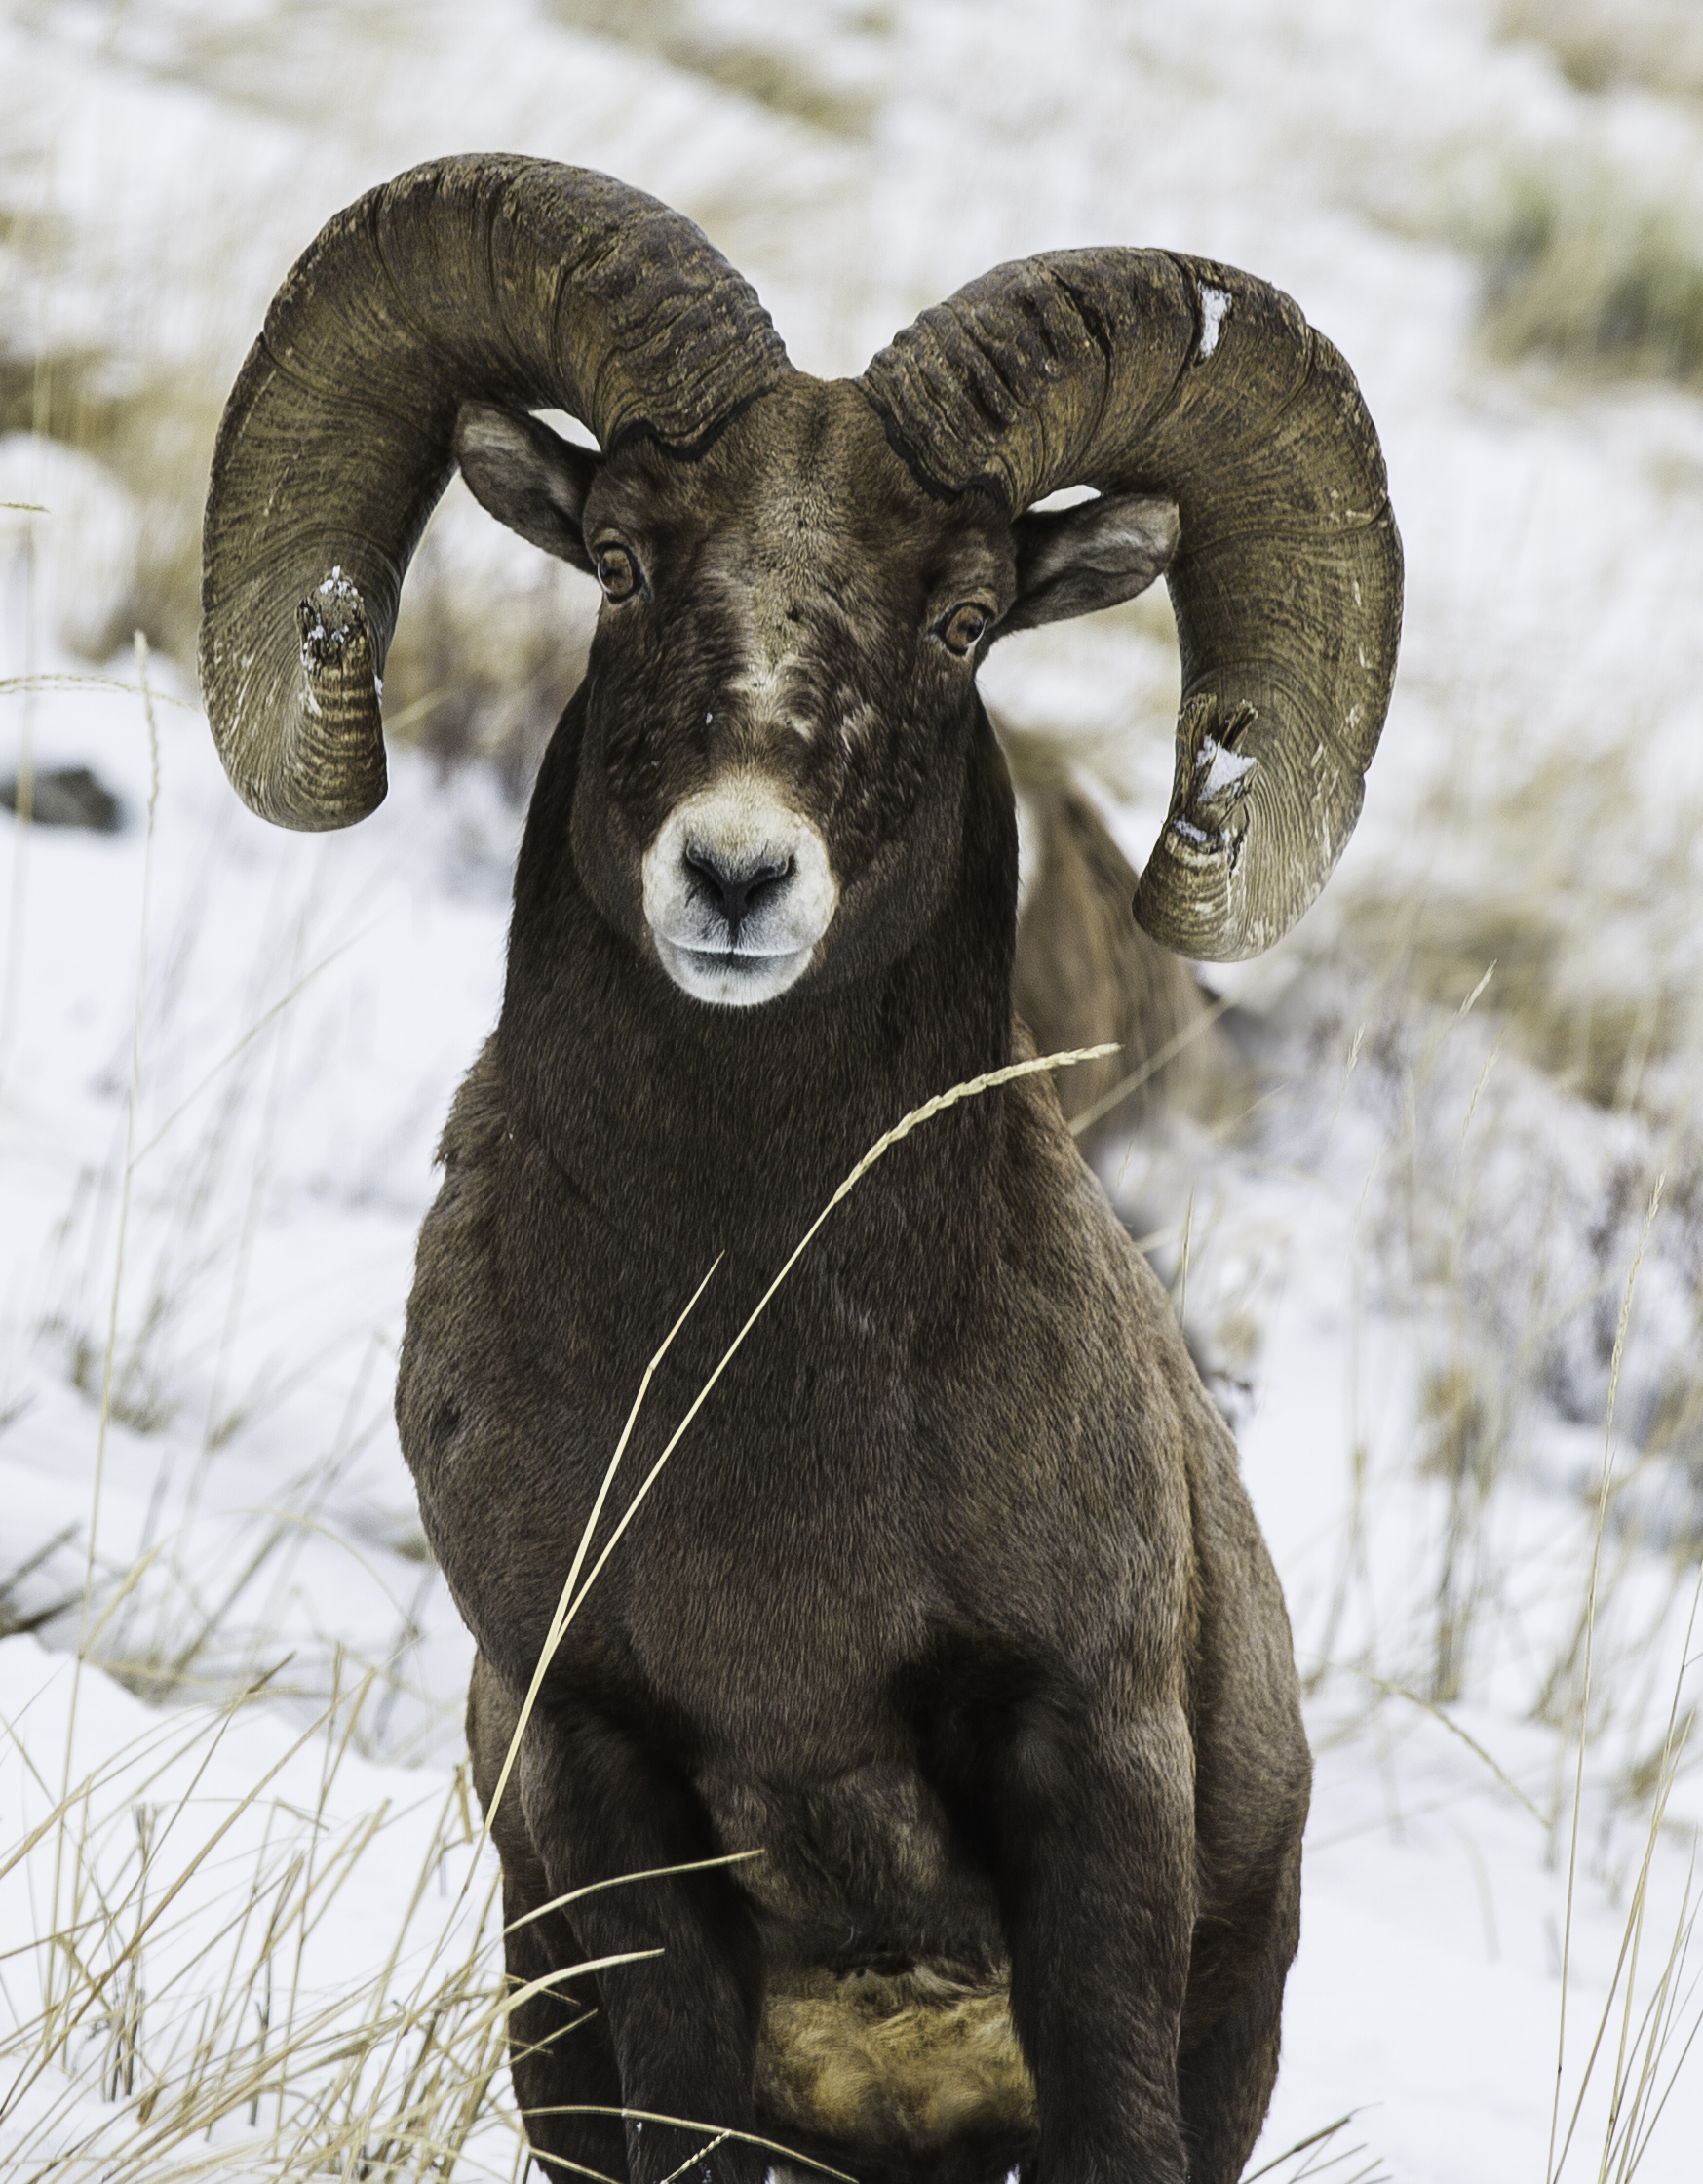   YELLOWSTONE. &nbsp;"DOES AMAZON SELL TIPS FOR WORN OUT HORNS? &nbsp;IF THEY DO, WILL THEY DELIVER TO A NATIONAL PARK"?  